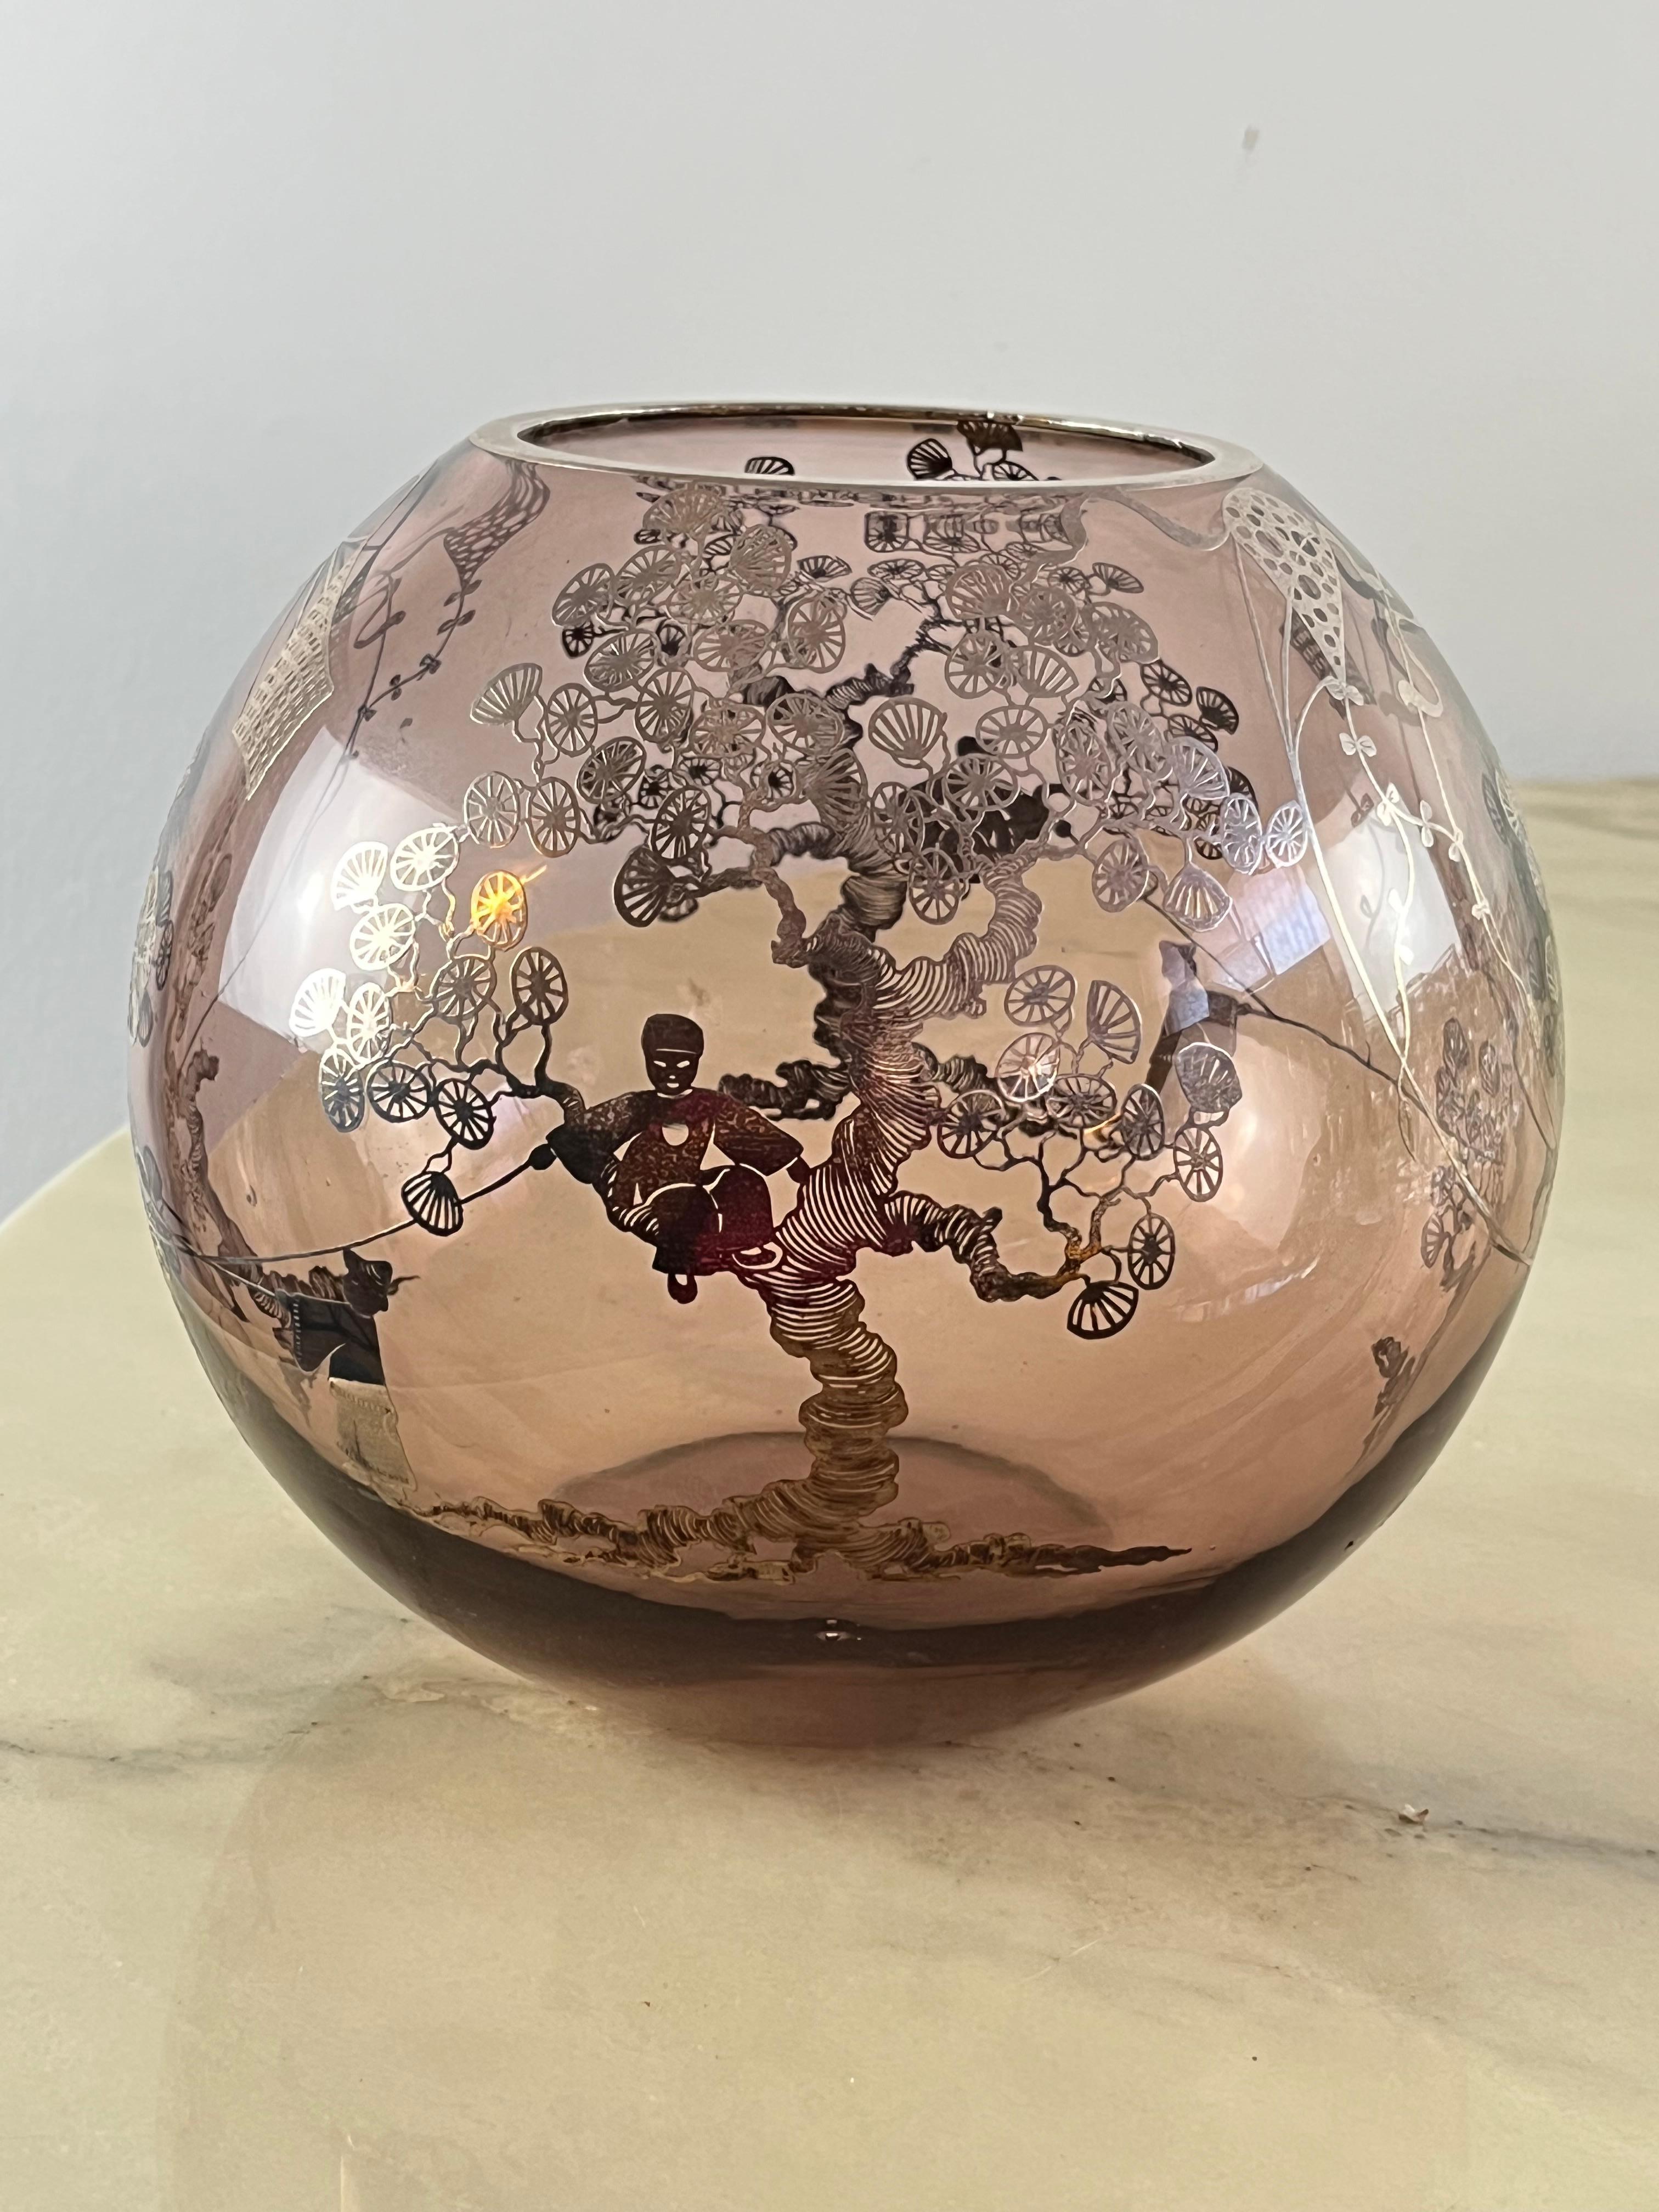 Oriental glass bowl vase, Japan, 1950s
Decorated.
Found in a noble apartment. Intact. Small signs of the time.